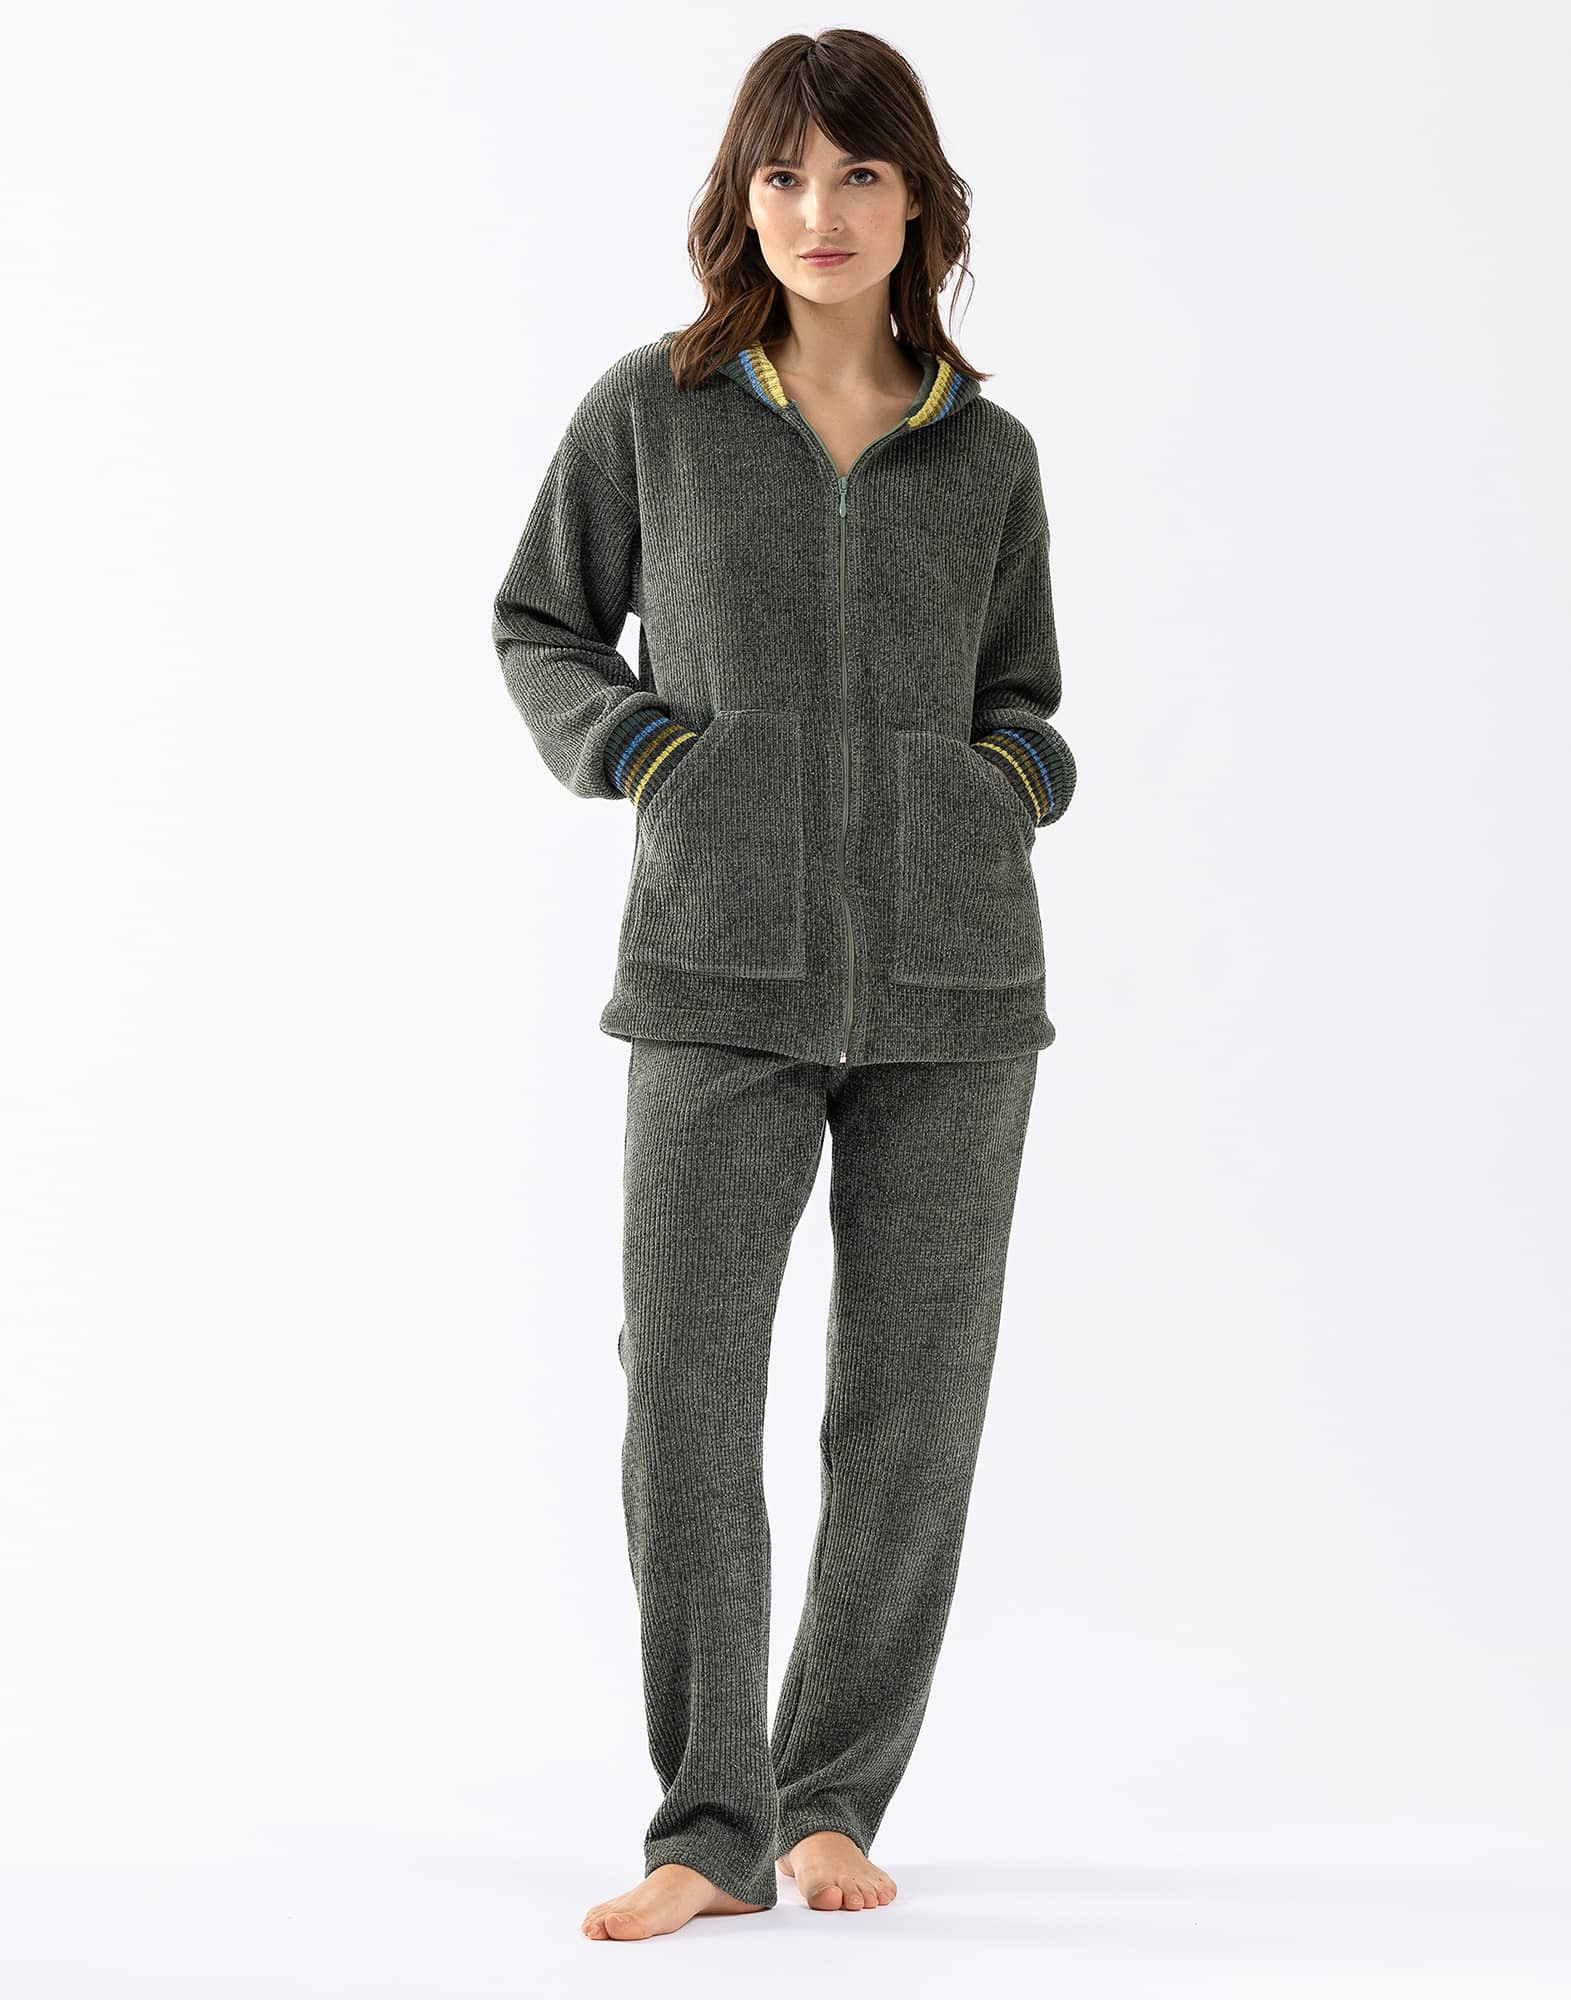 Zip-front hoodie in chenille knit with lurex ICONIC 670 moss-green